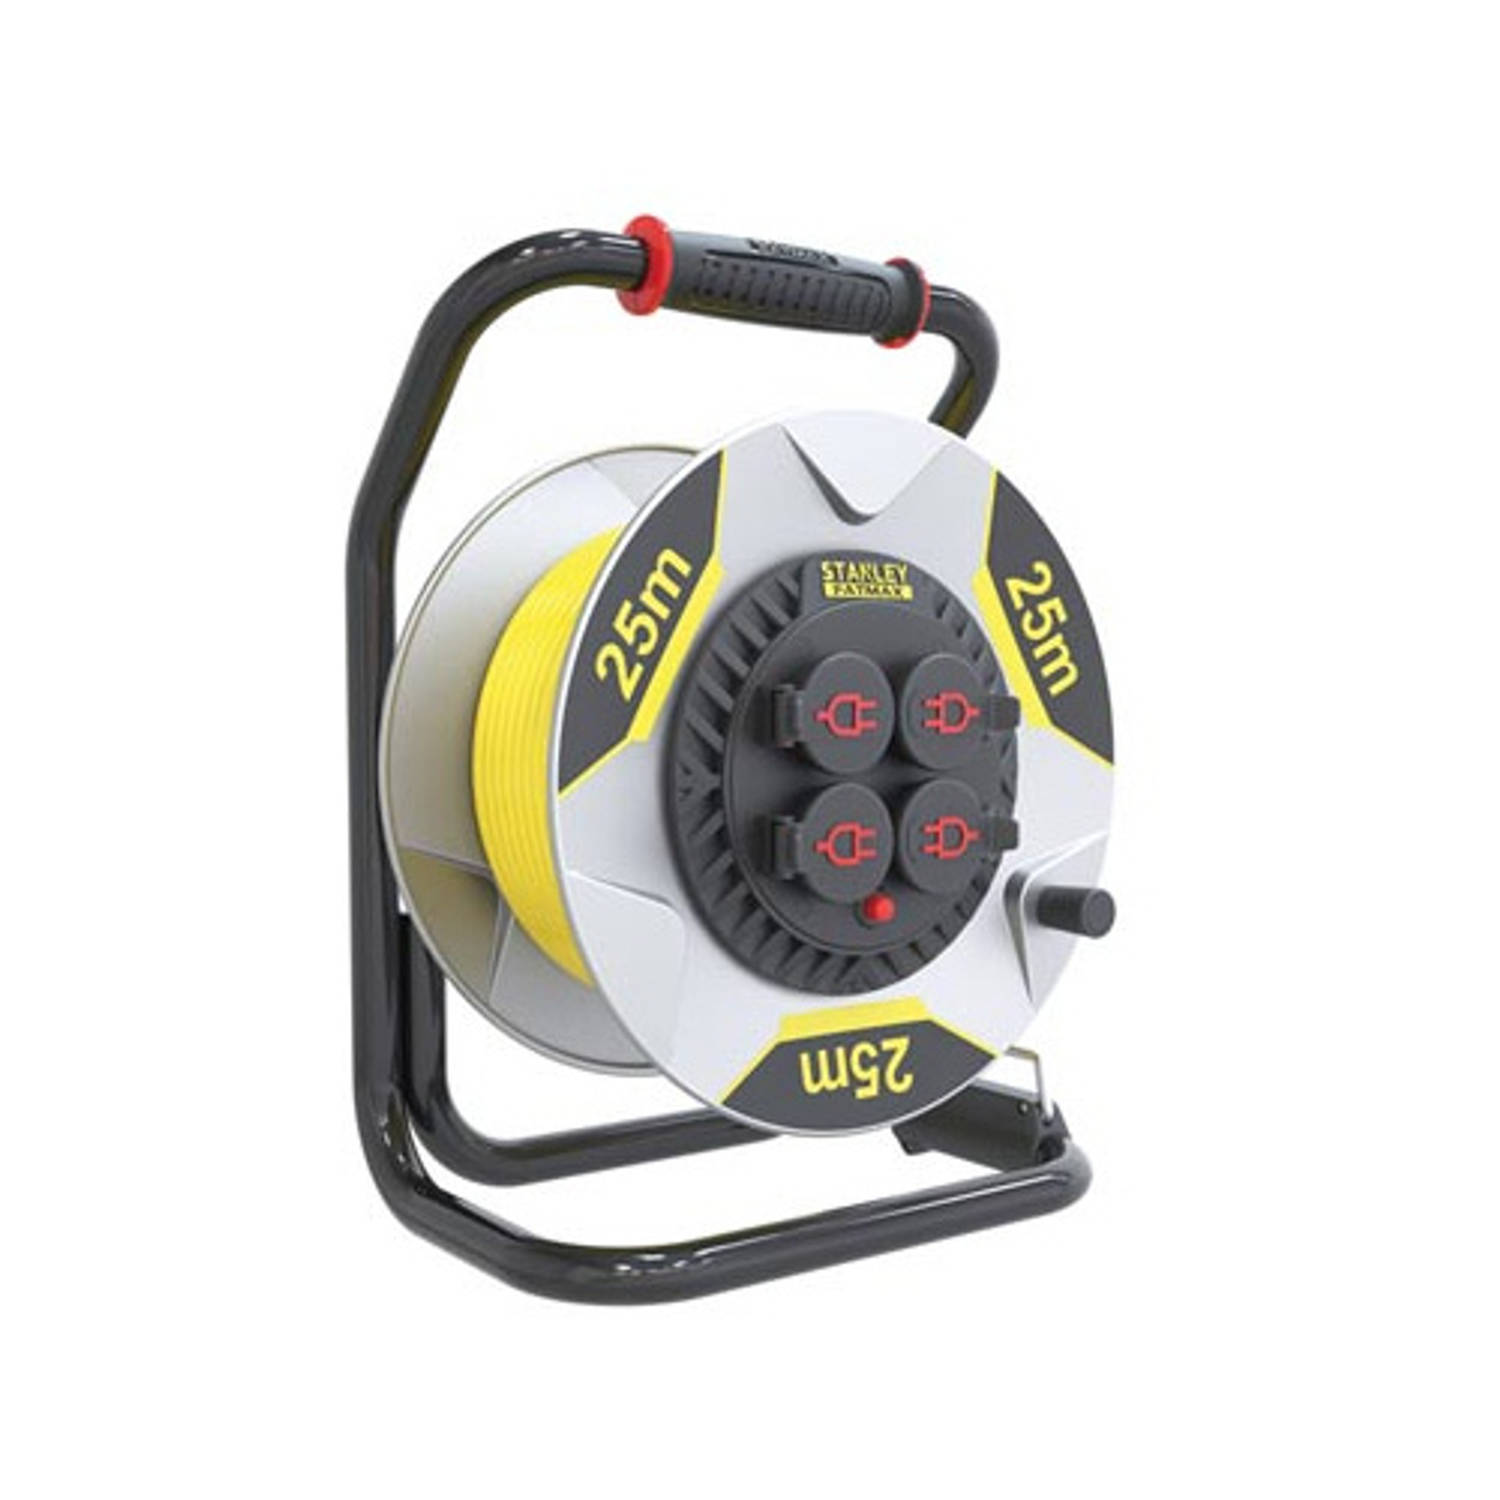 Stanley Fatmax Professional Neoprene Cable Reel With Anti-twist System 25 M 3g2.5 4 Sockets